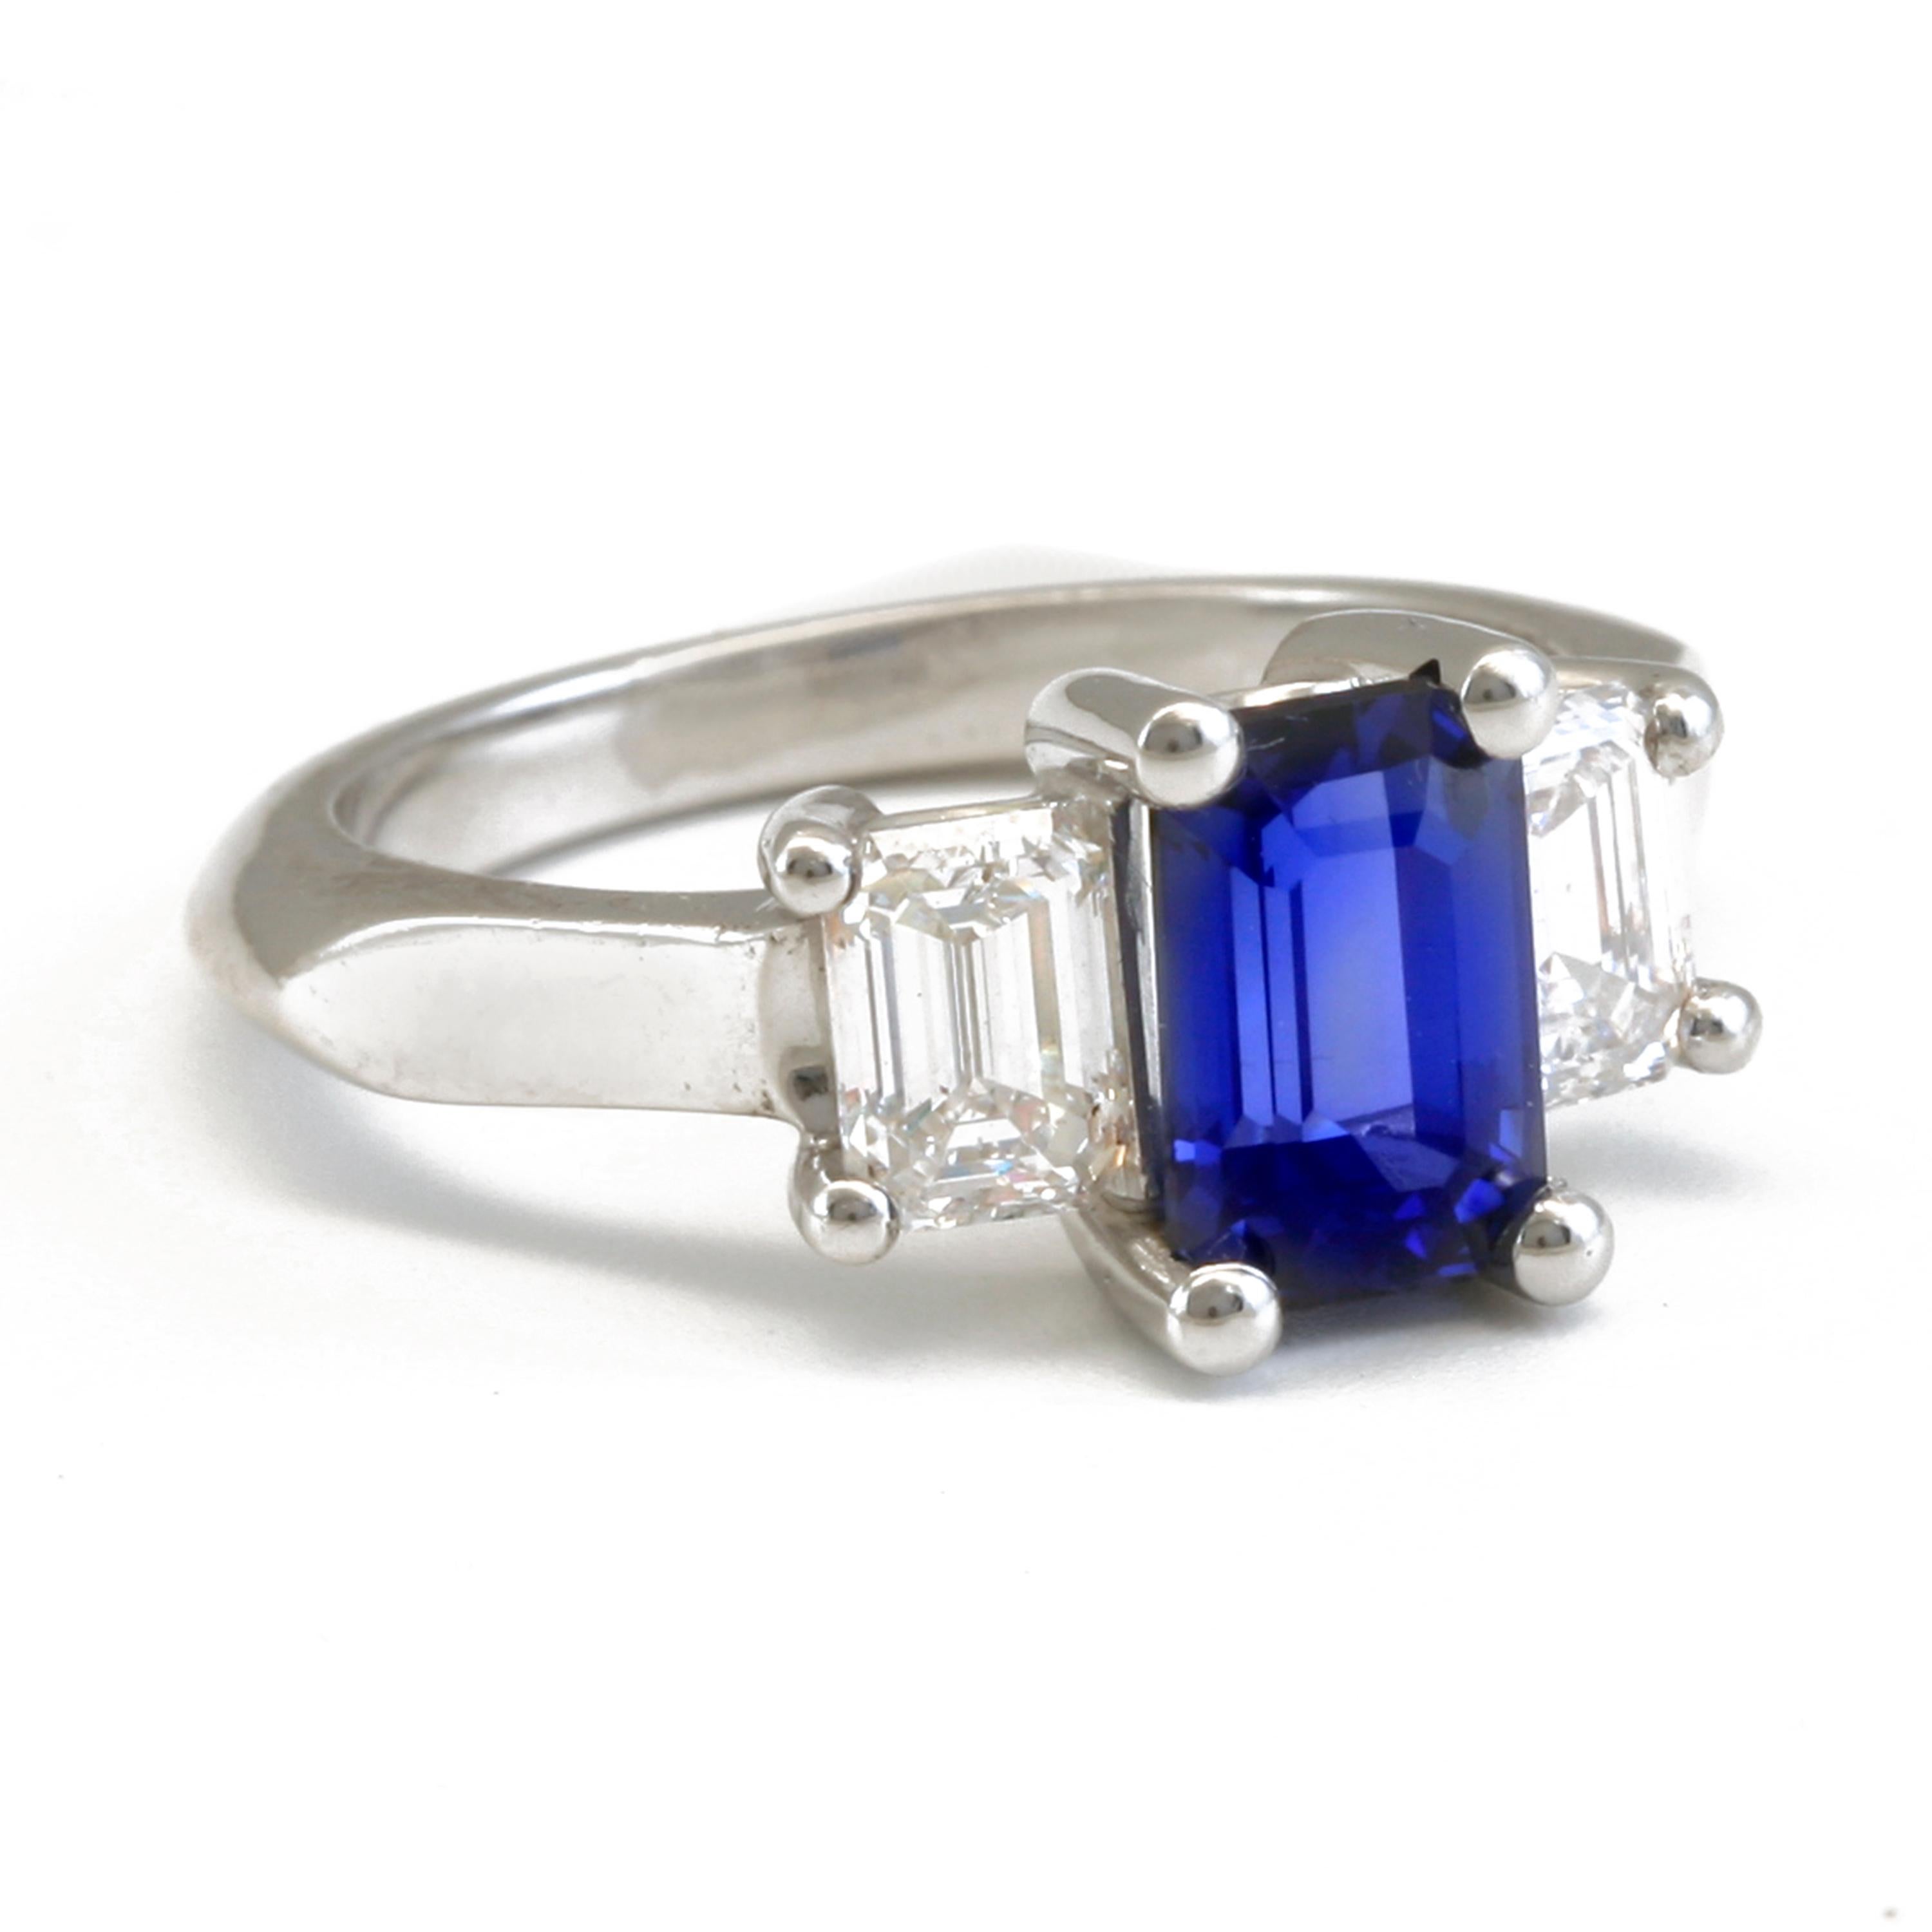 This emerald cut (emerald cut refers to the name of the gemstone's shape not gem type) Ceylon Blue is a 2.05 Carat Sapphire with 1.04 total carat weight in two side stones. The Diamonds have DE color, VS clarity, are also emerald cut, set in